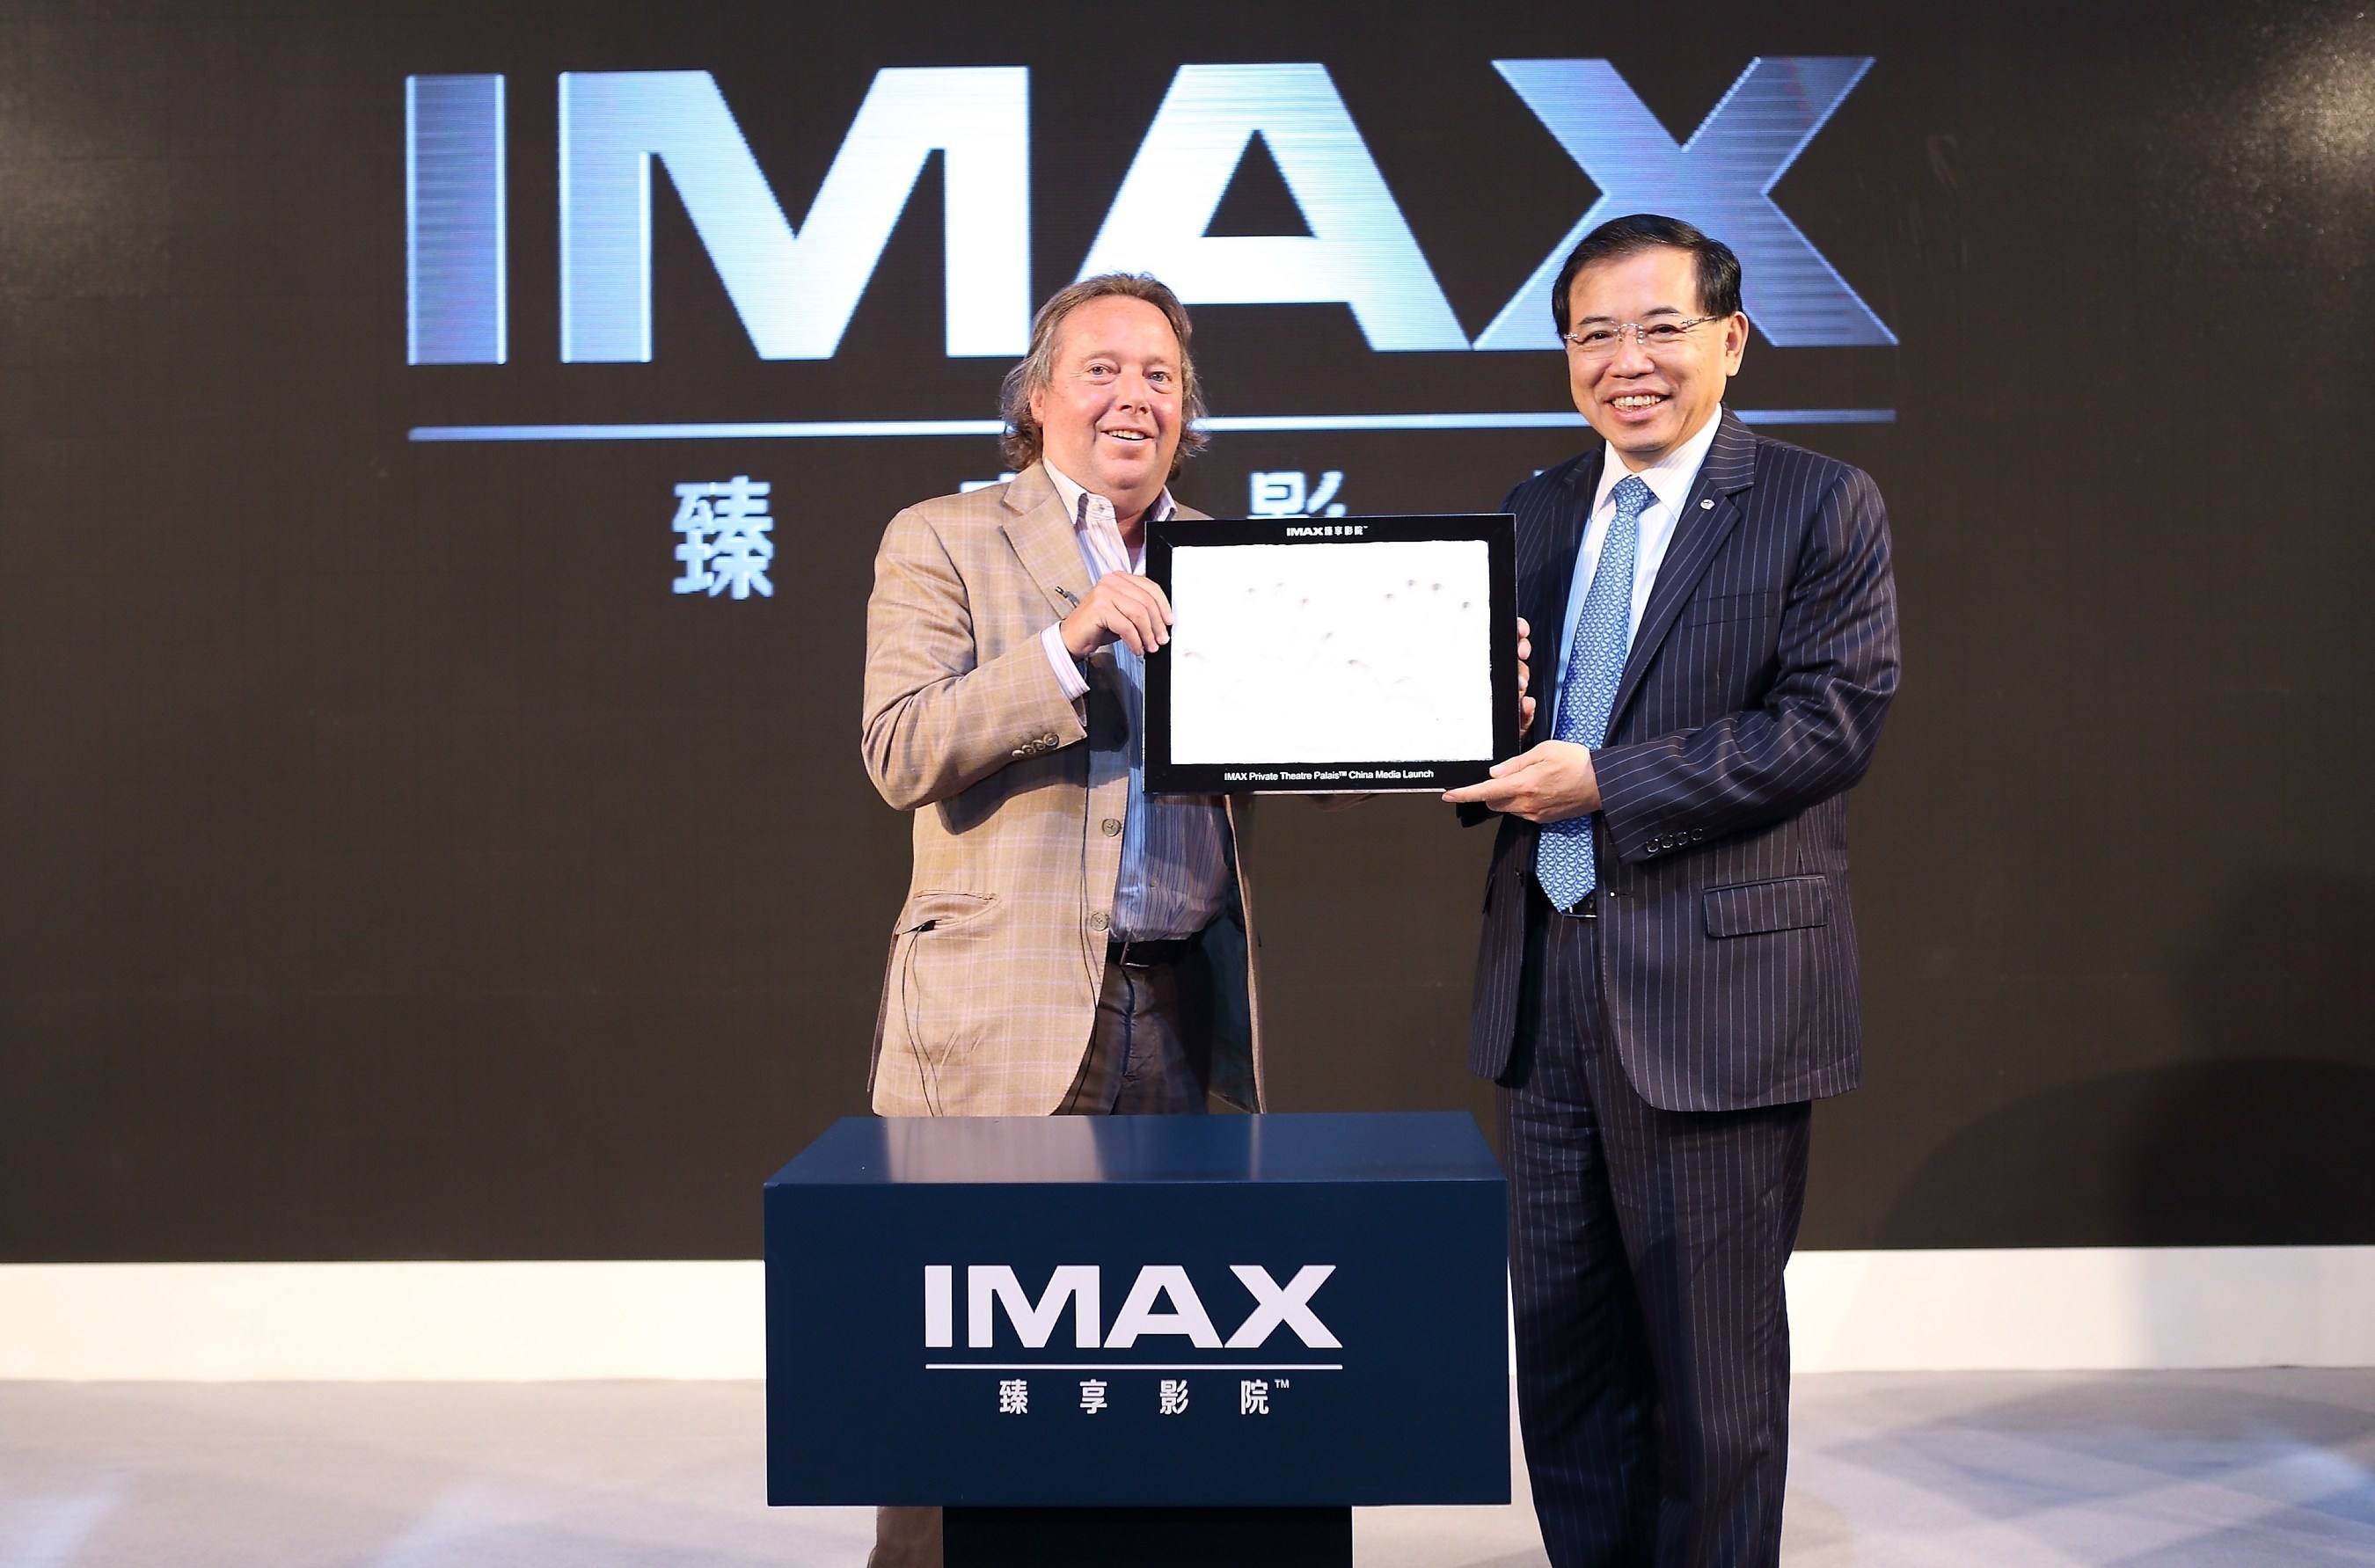 IMAX CEO Richard L. Gelfond and TCL Chairman and CEO Li Dongsheng commemorate the launch of the IMAX Private Theatre "Palais(tm)" - jointly developed by IMAX Corp. and TCL - in Shanghai.